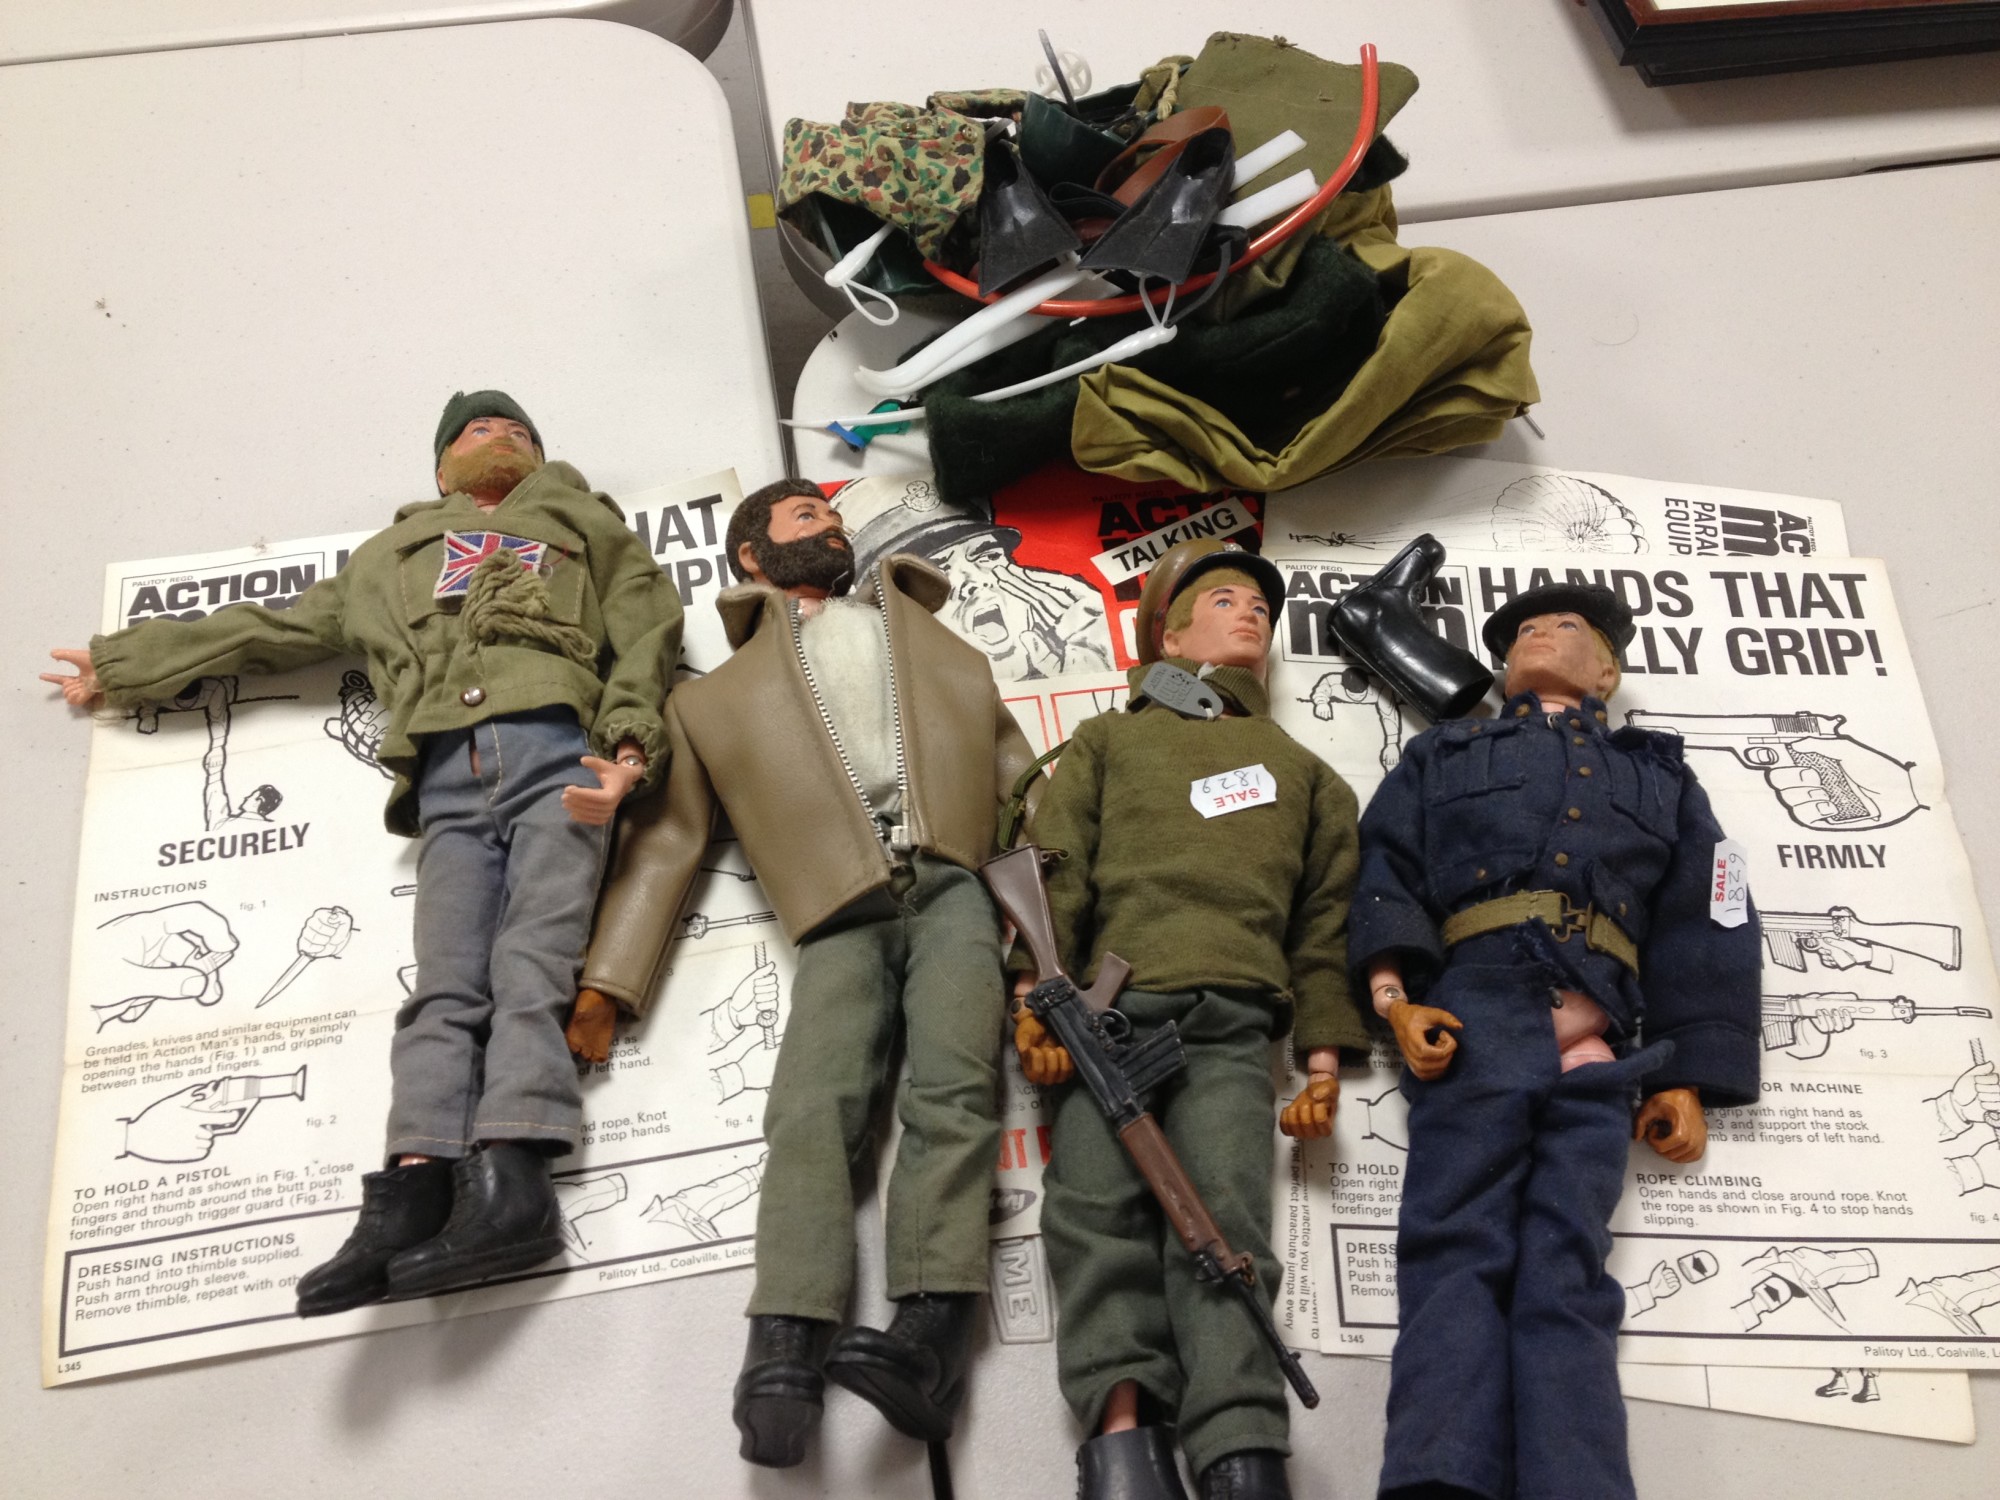 Talking action man comander and 3 others with various clothes and accessories